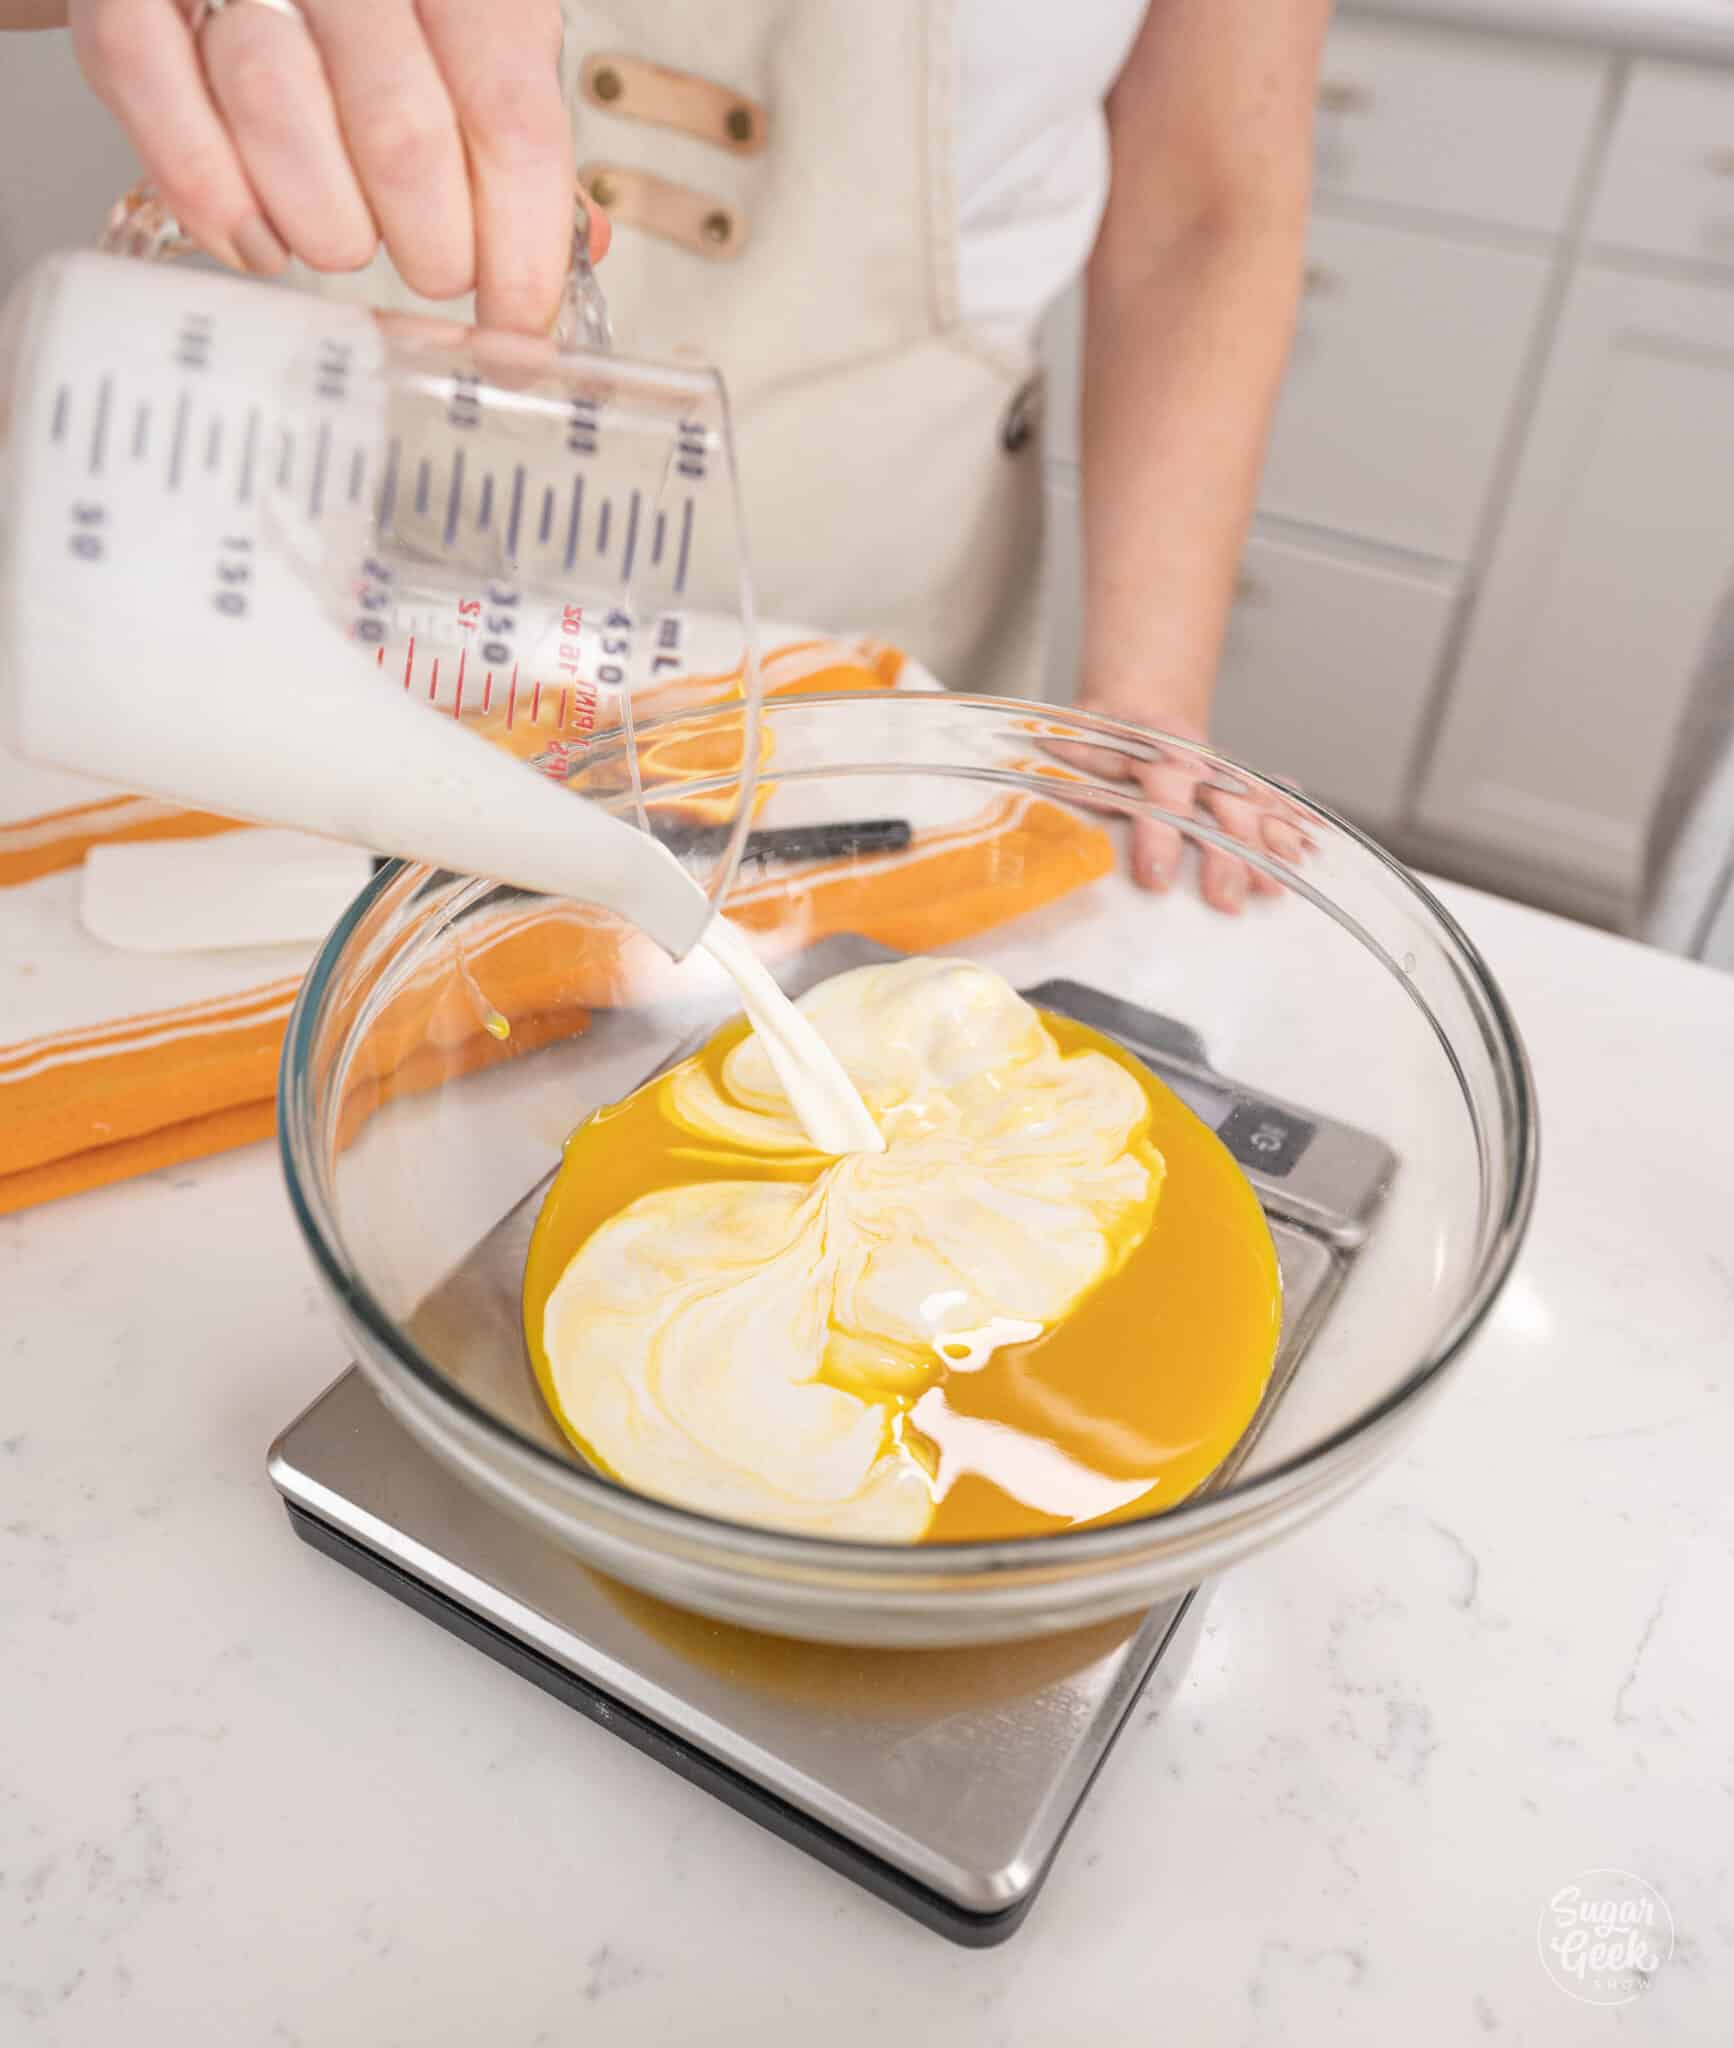 pouring milk into a bowl of orange concentrate